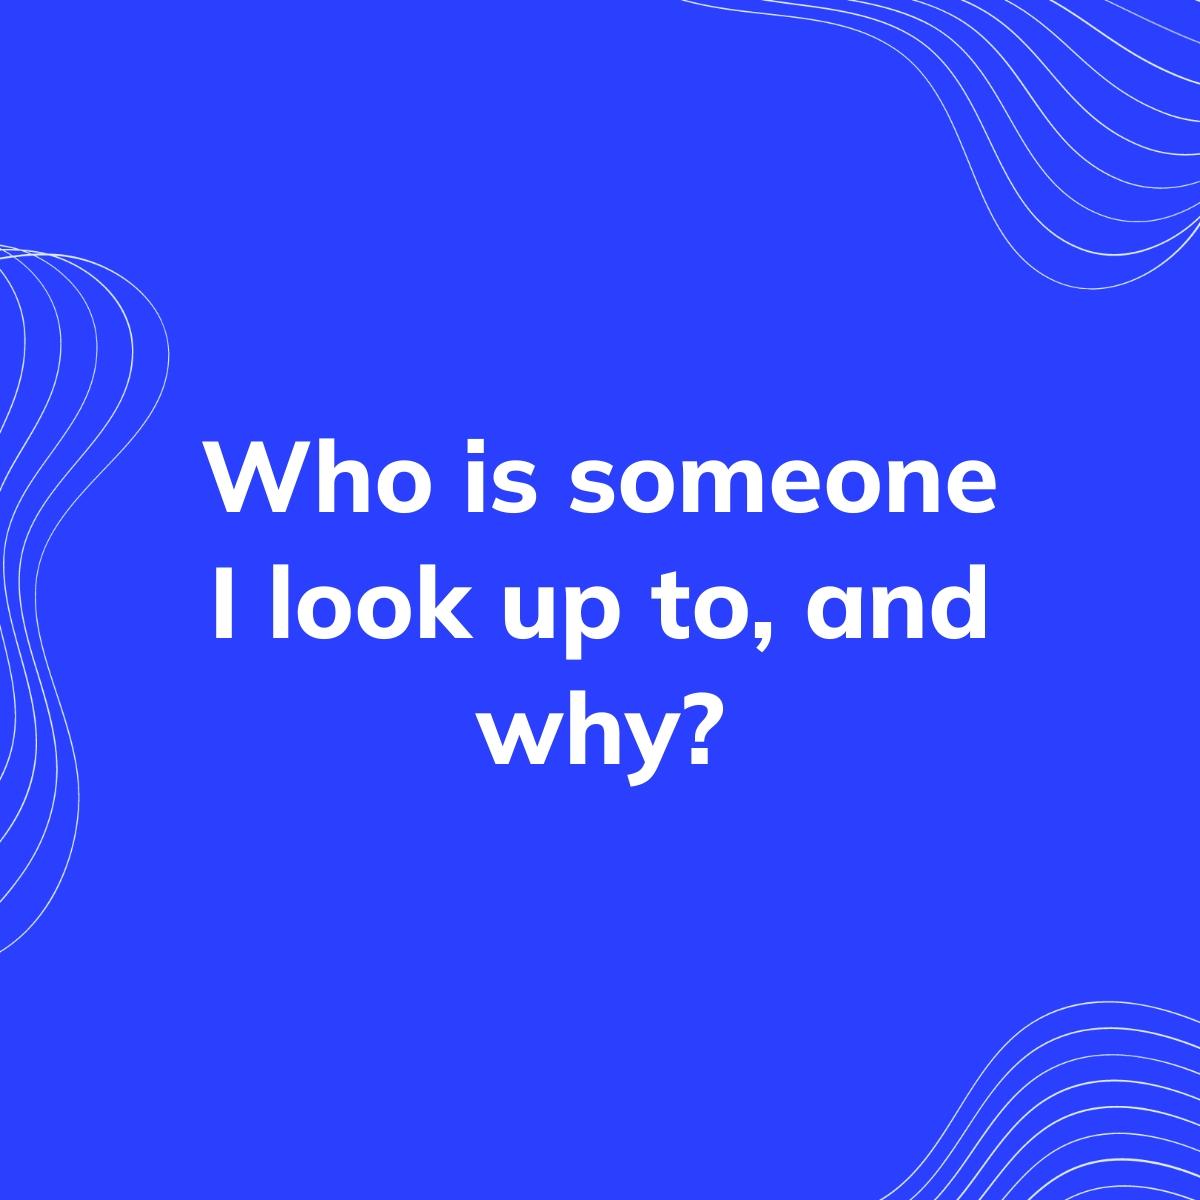 Journal Prompt: Who is someone I look up to, and why?